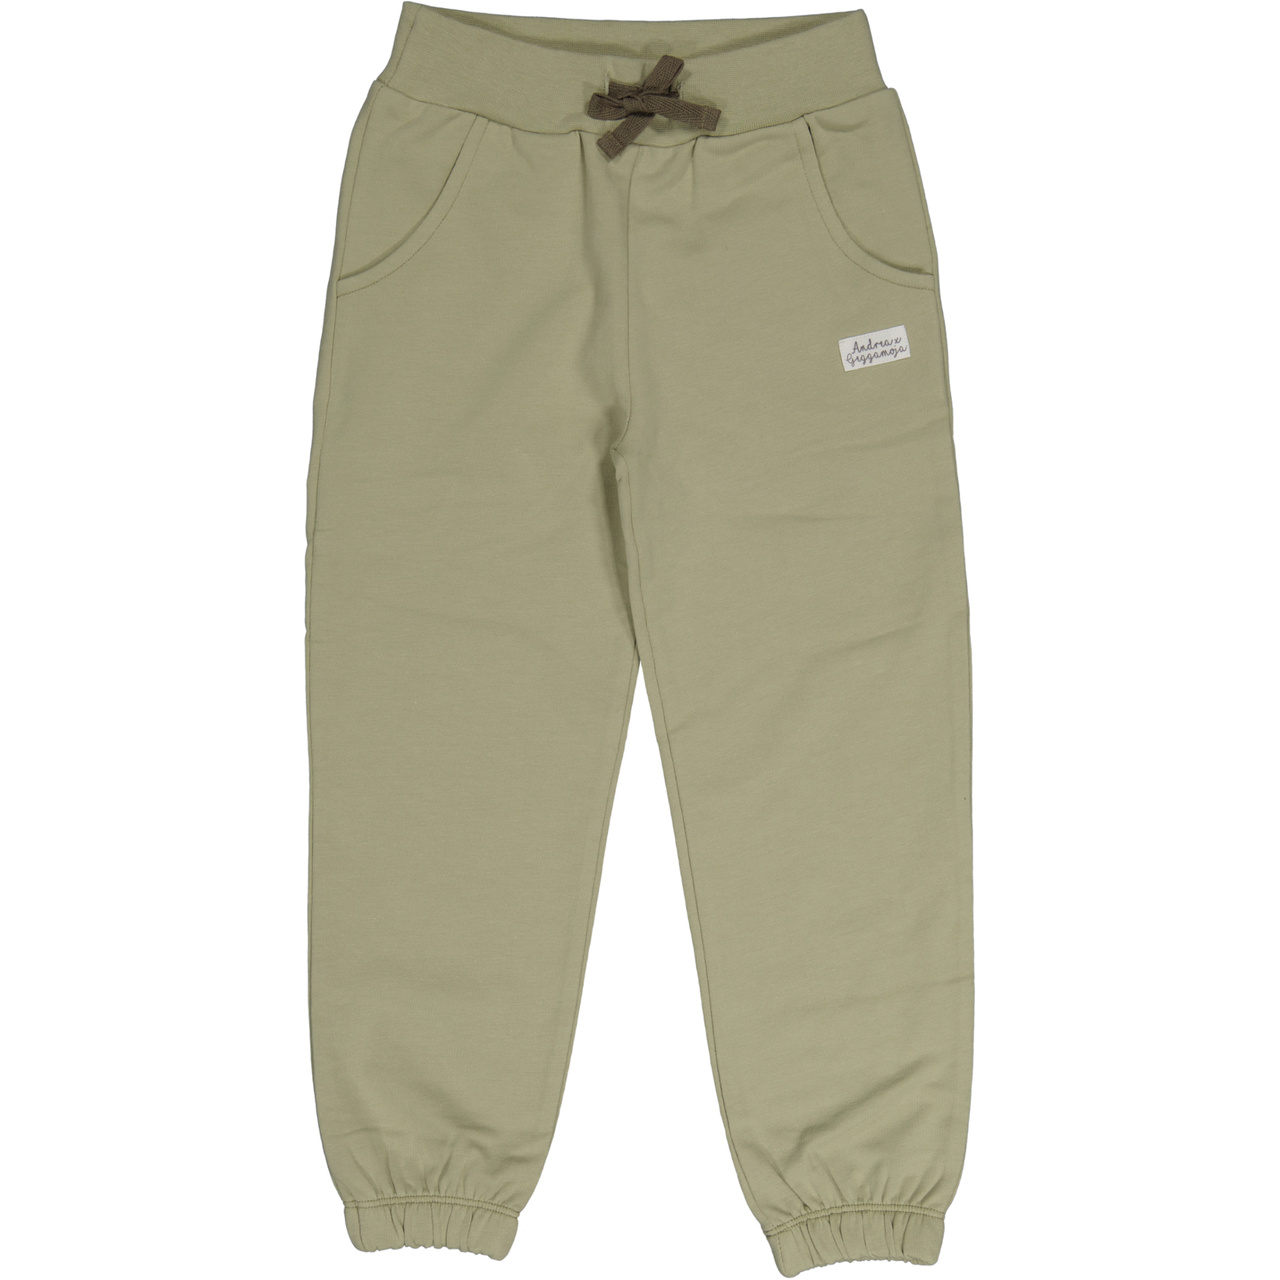 College trousers Olive 110/116